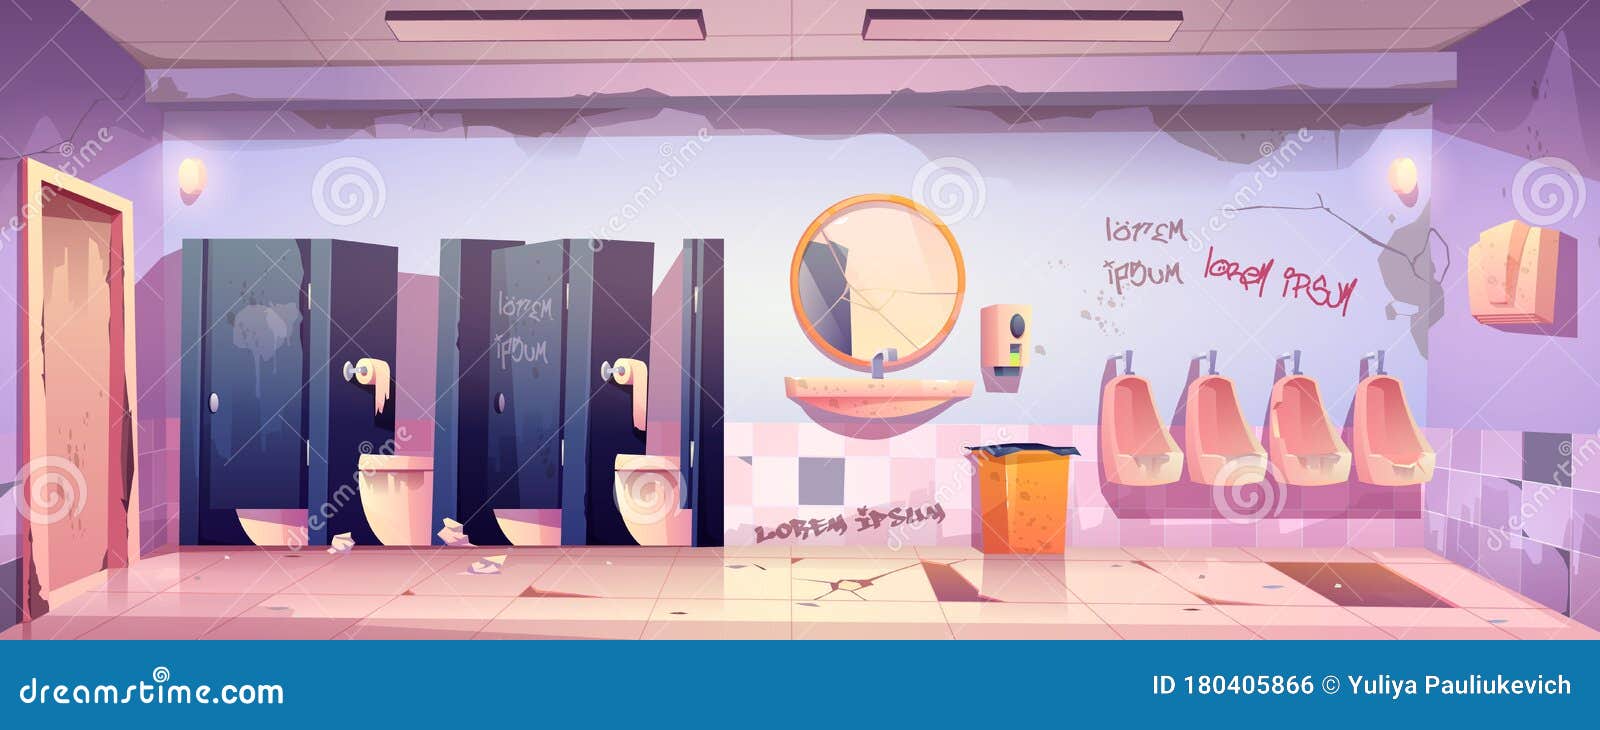 Dirty Public Restroom With Messy Toilet Bowls Vector Illustration